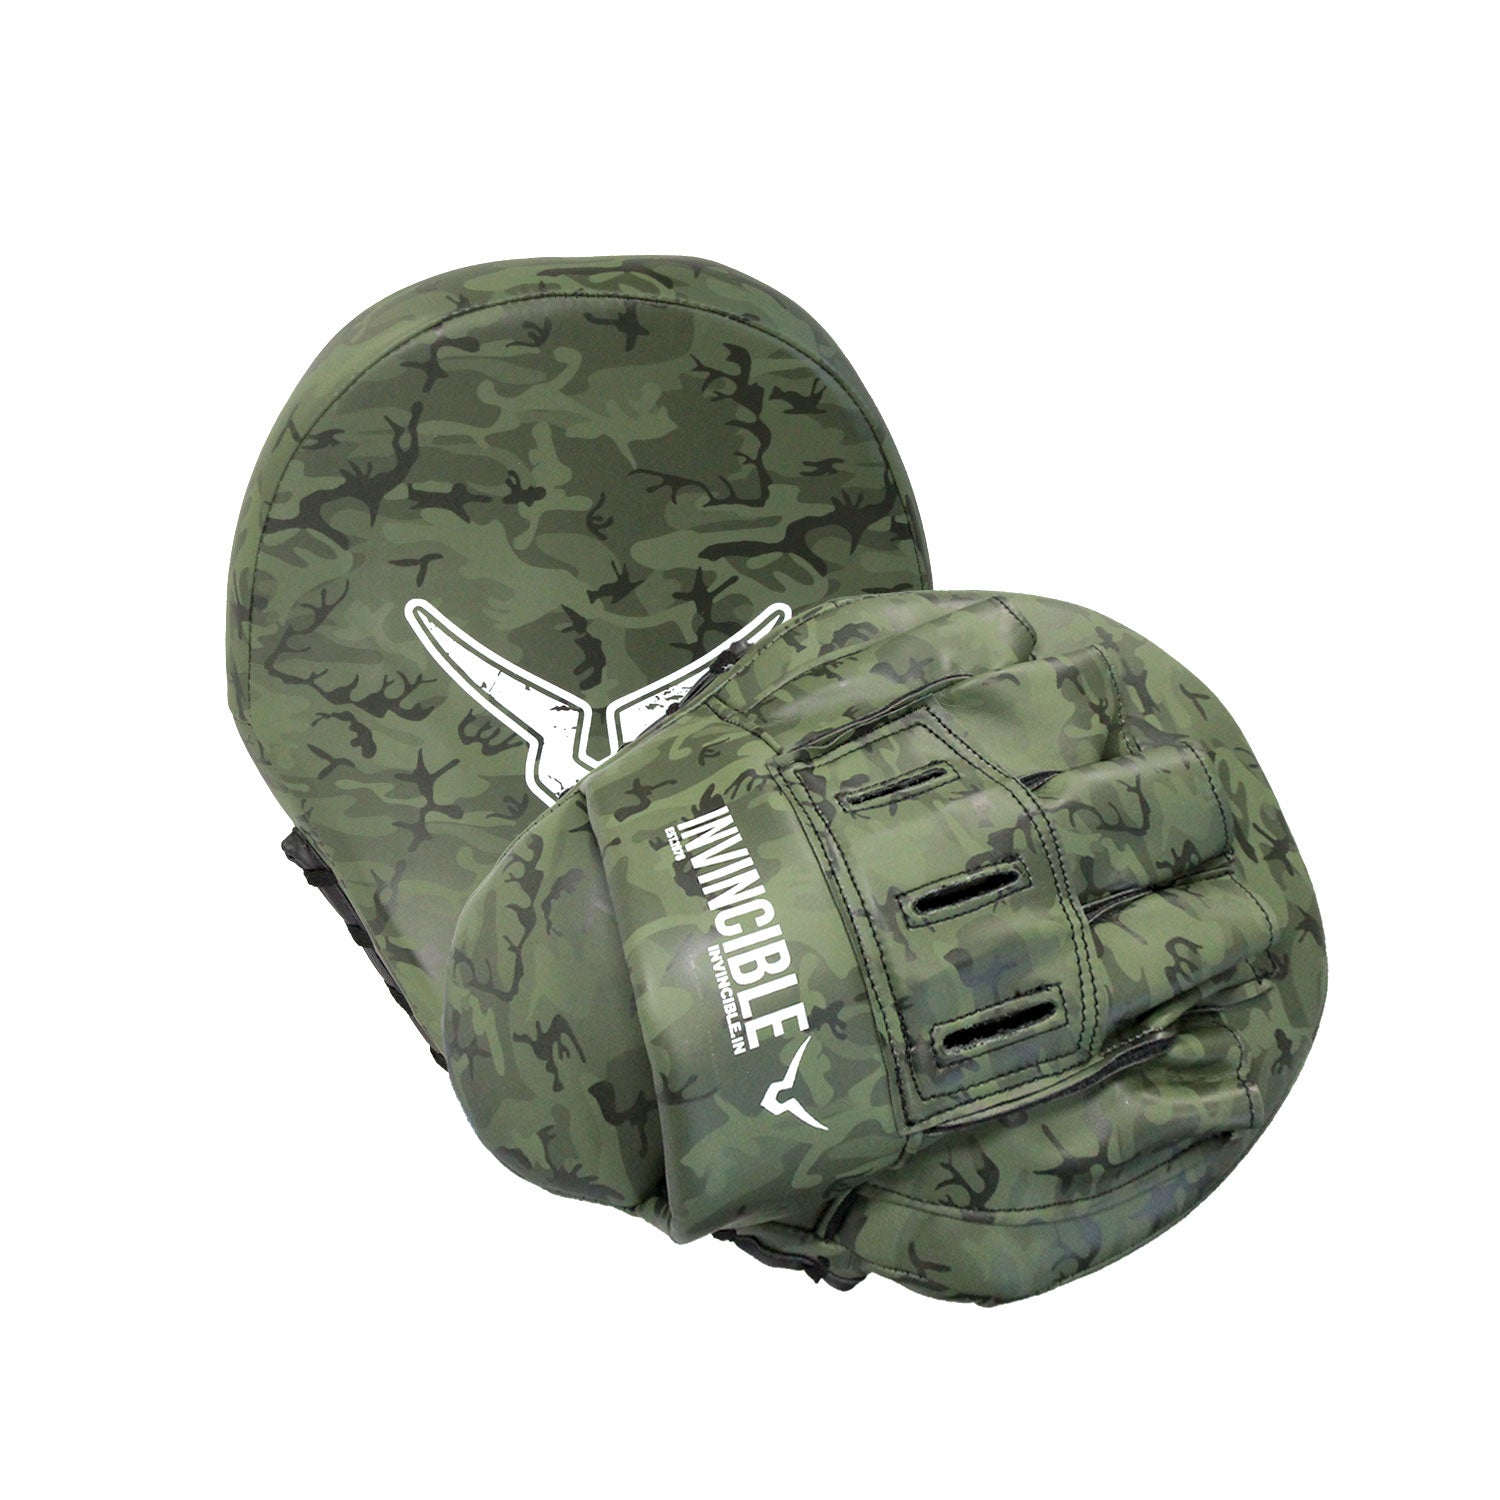 Invincible Commando Punch Mitts, Focus Pad Boxing